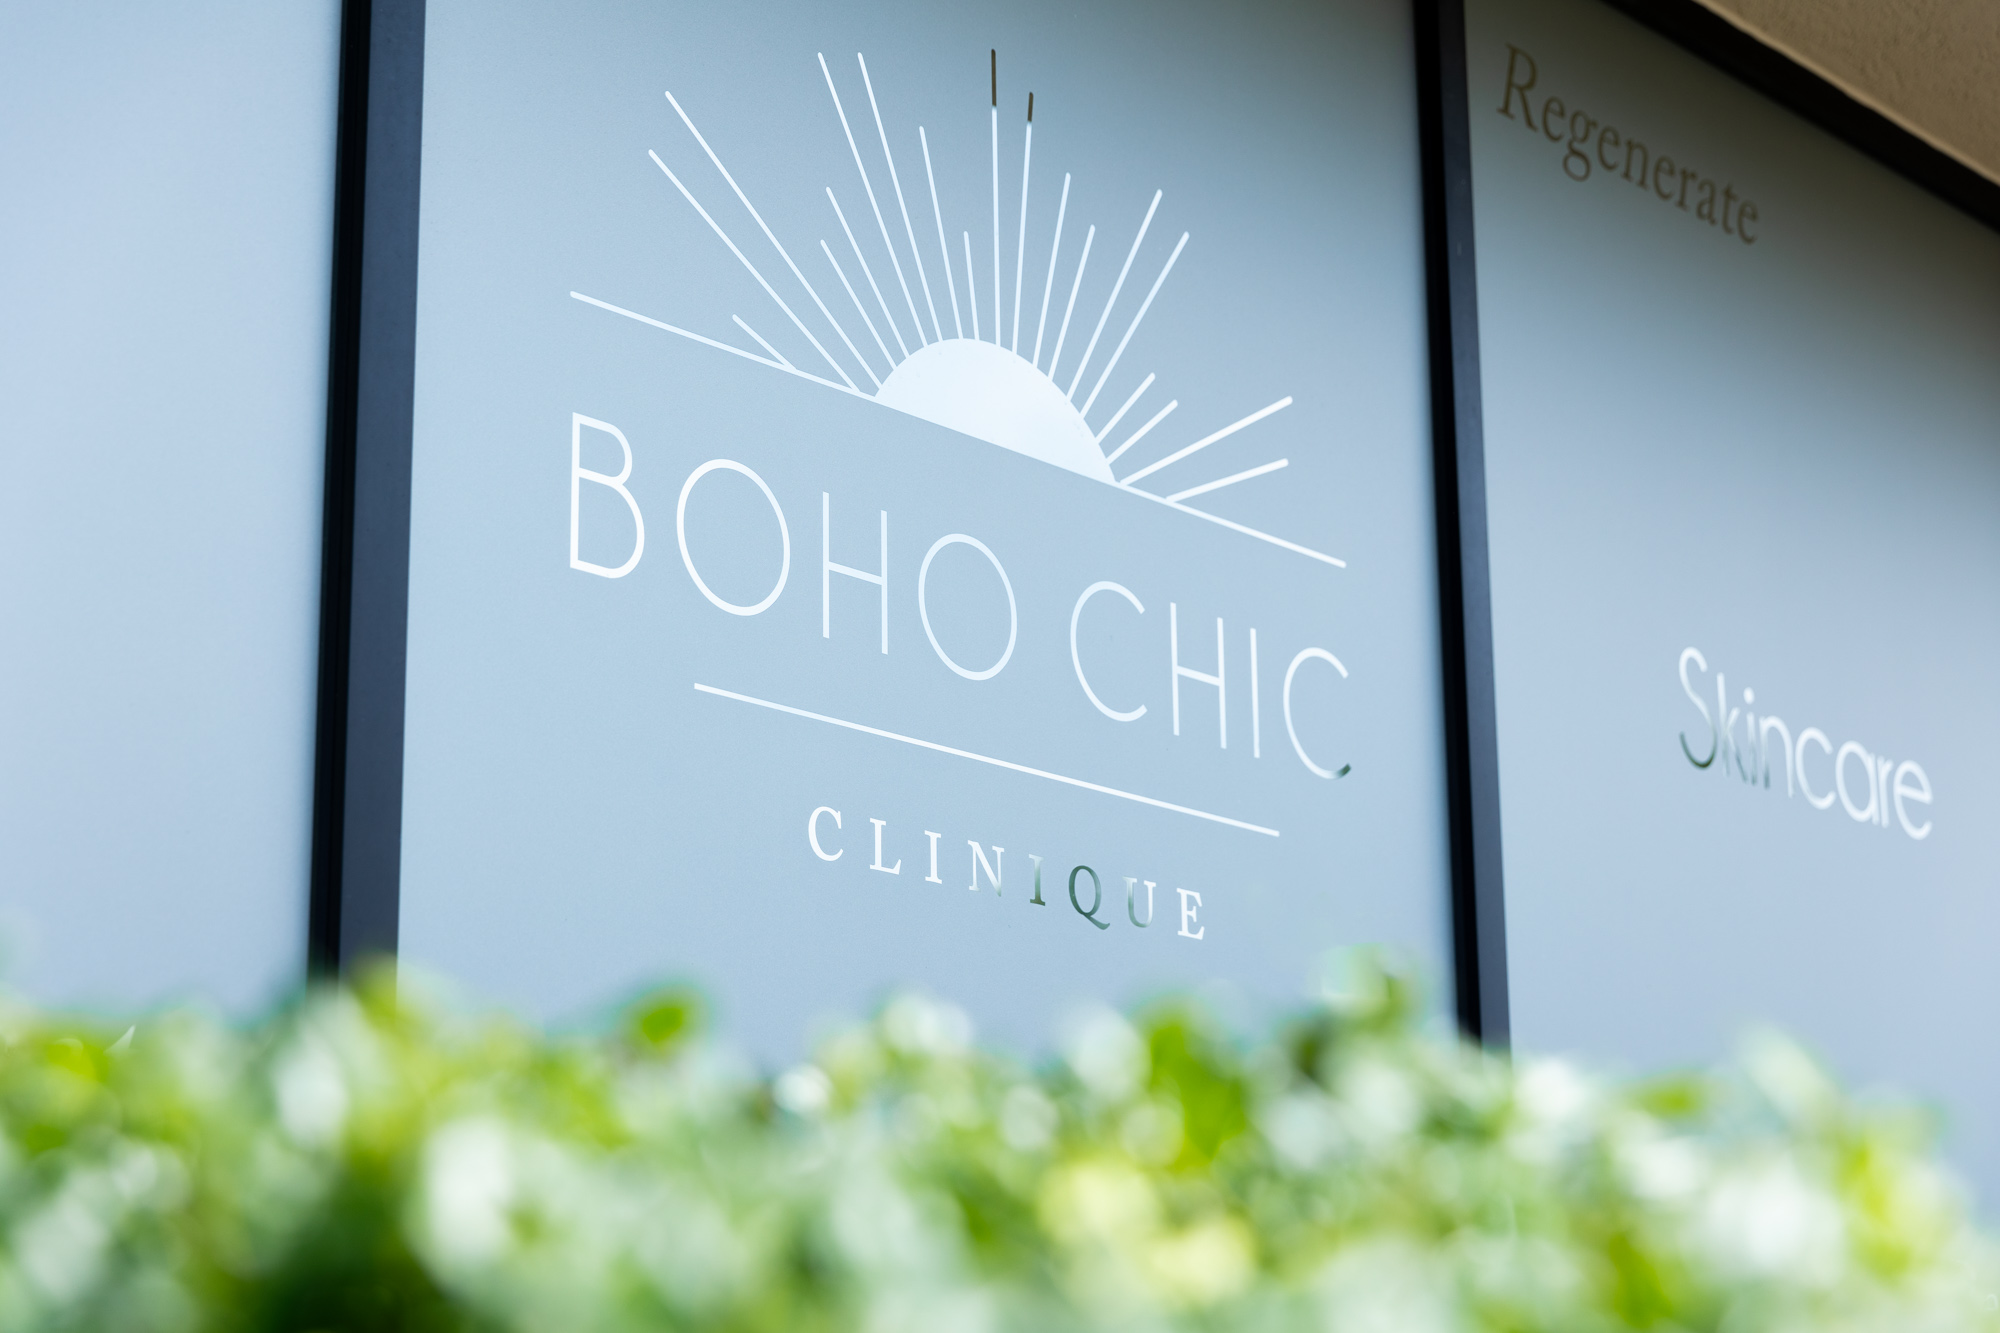 Boho Chic, the perfect place for IV Therapy near Effingham